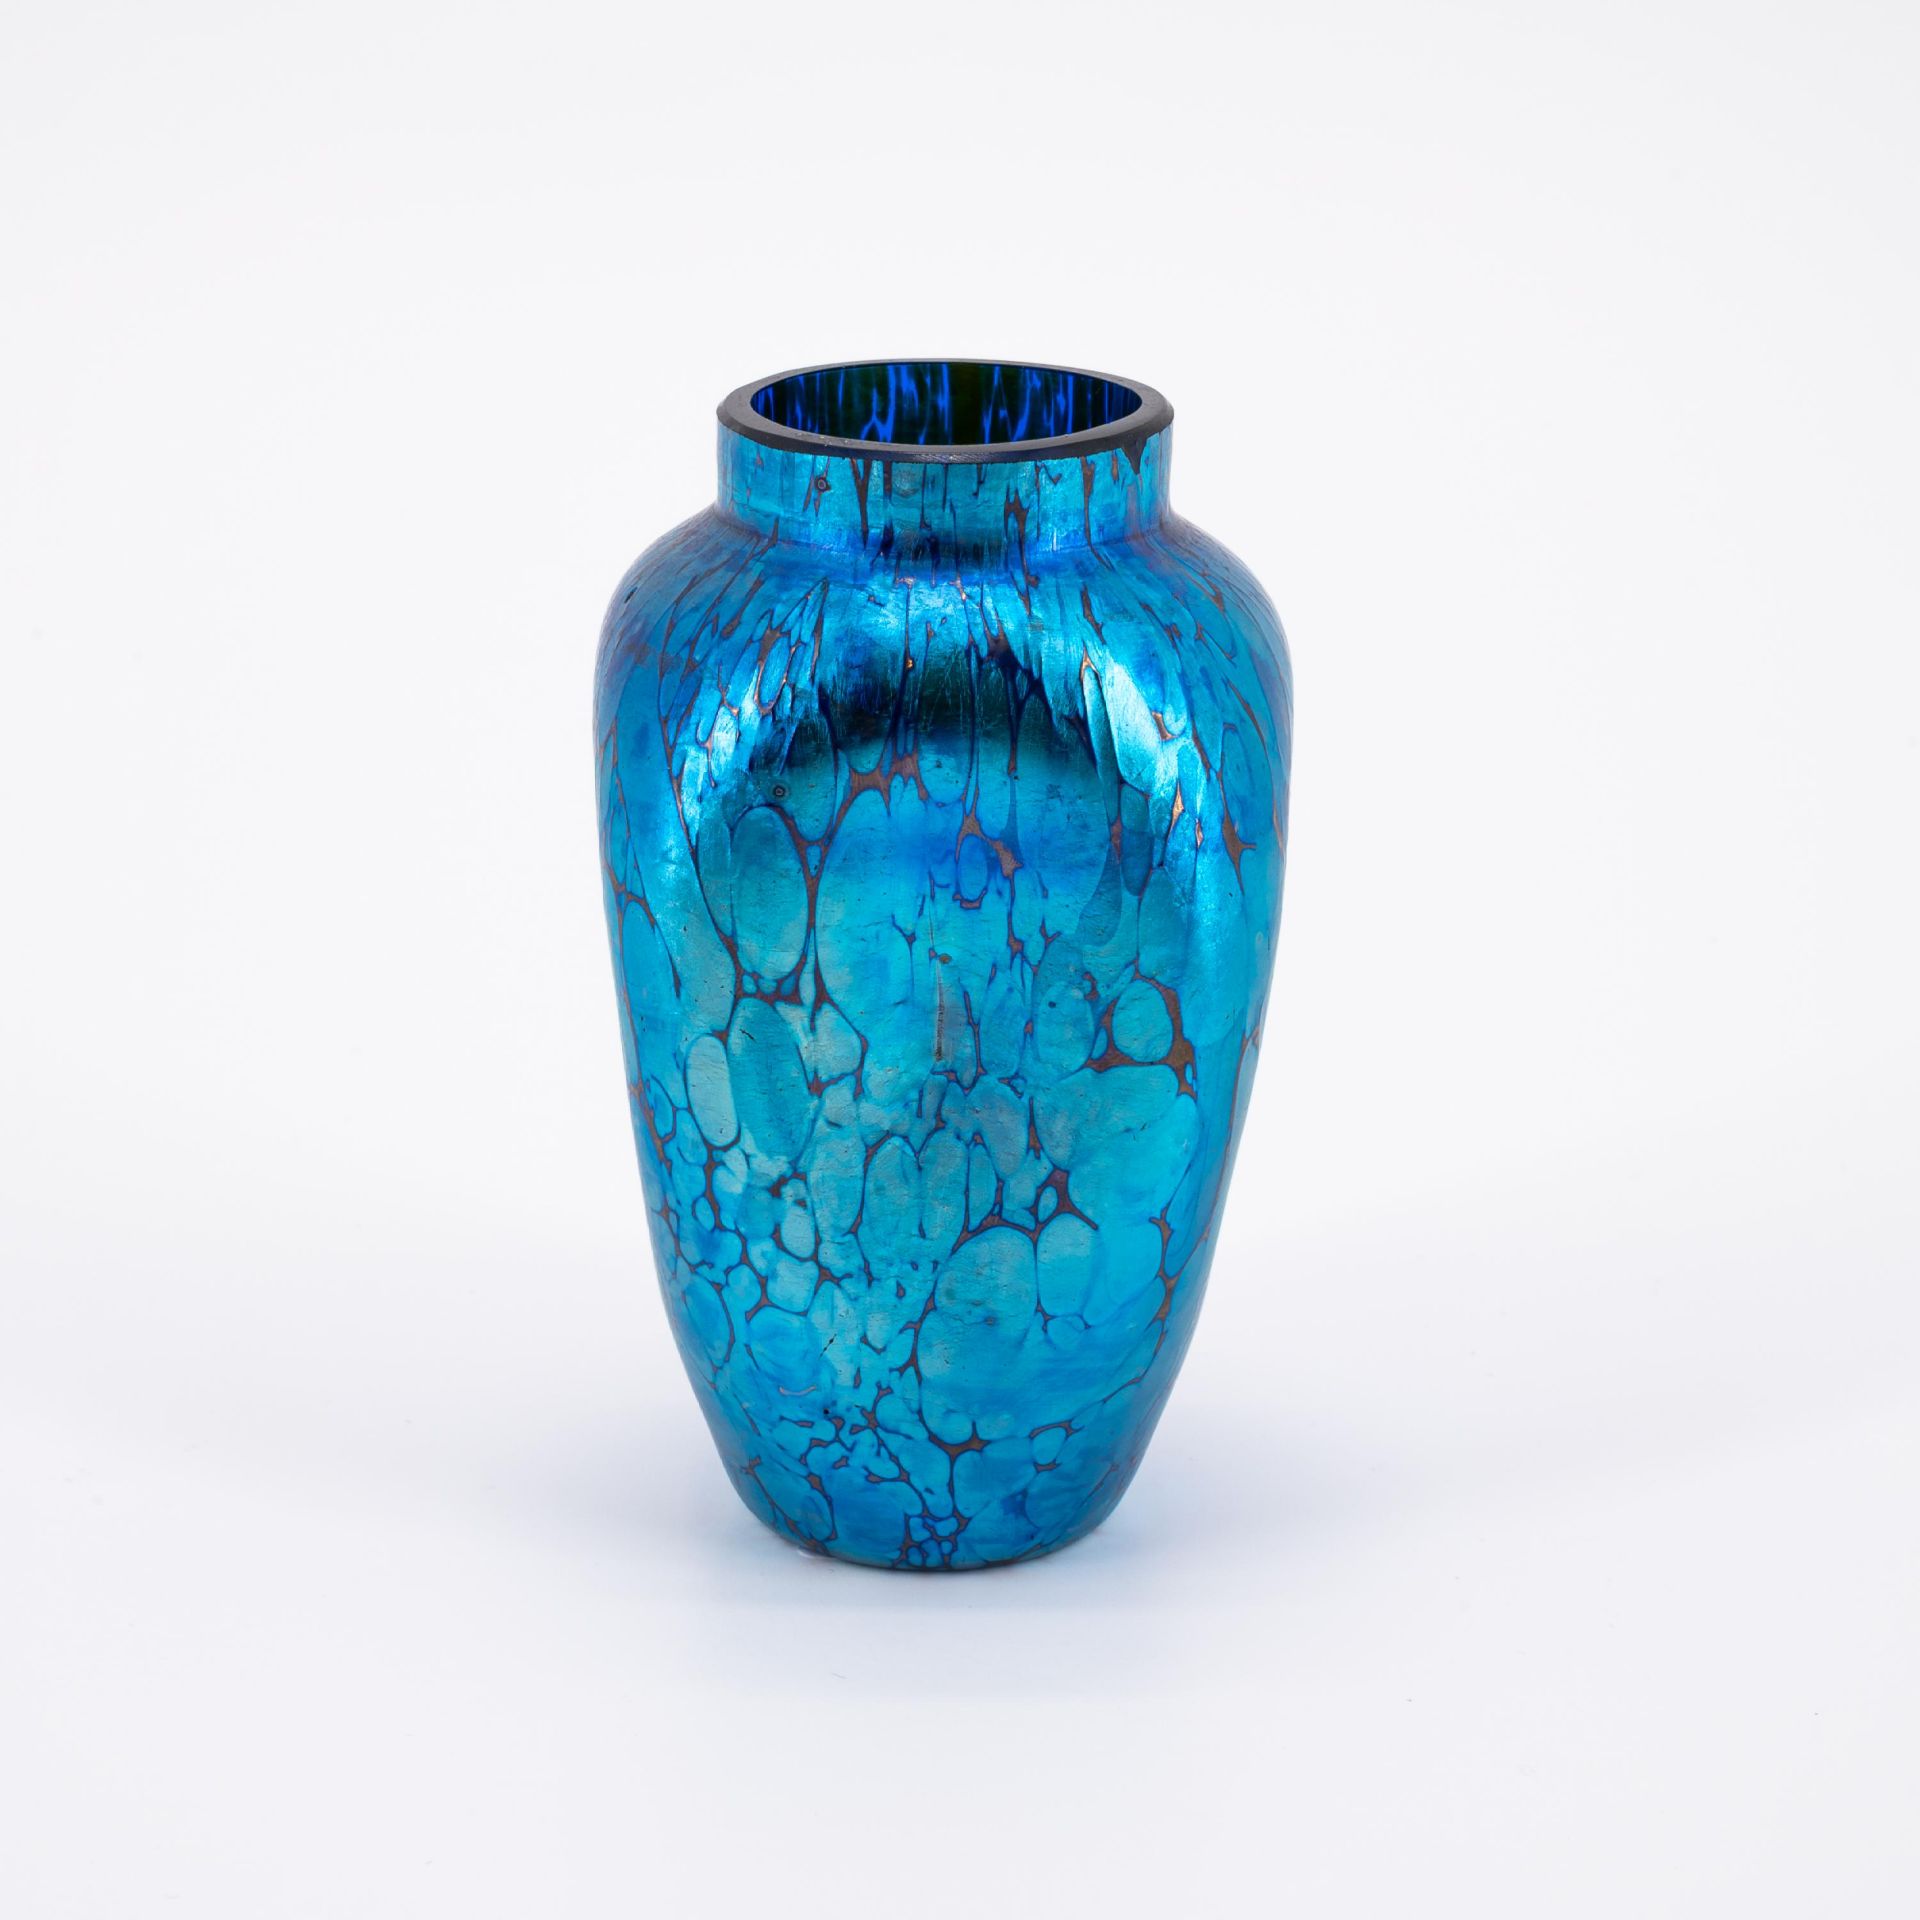 SMALL ELECTRIC-BLUE FAVRILE-GLASS VASE - Image 2 of 6